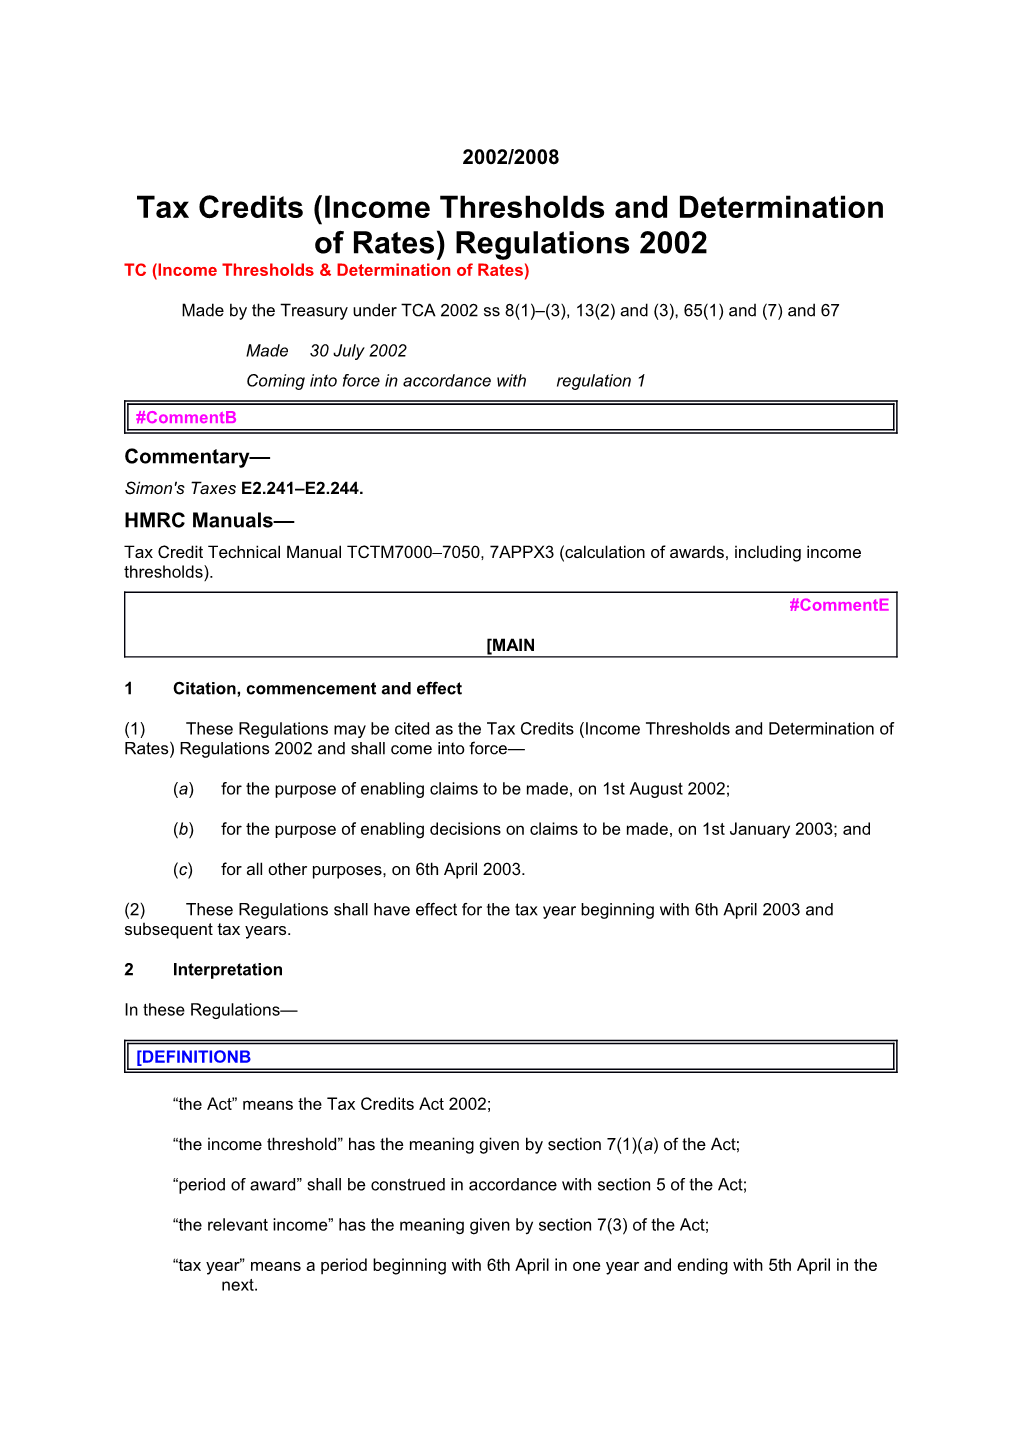 Tax Credits (Income Thresholds and Determination of Rates) Regulations 2002